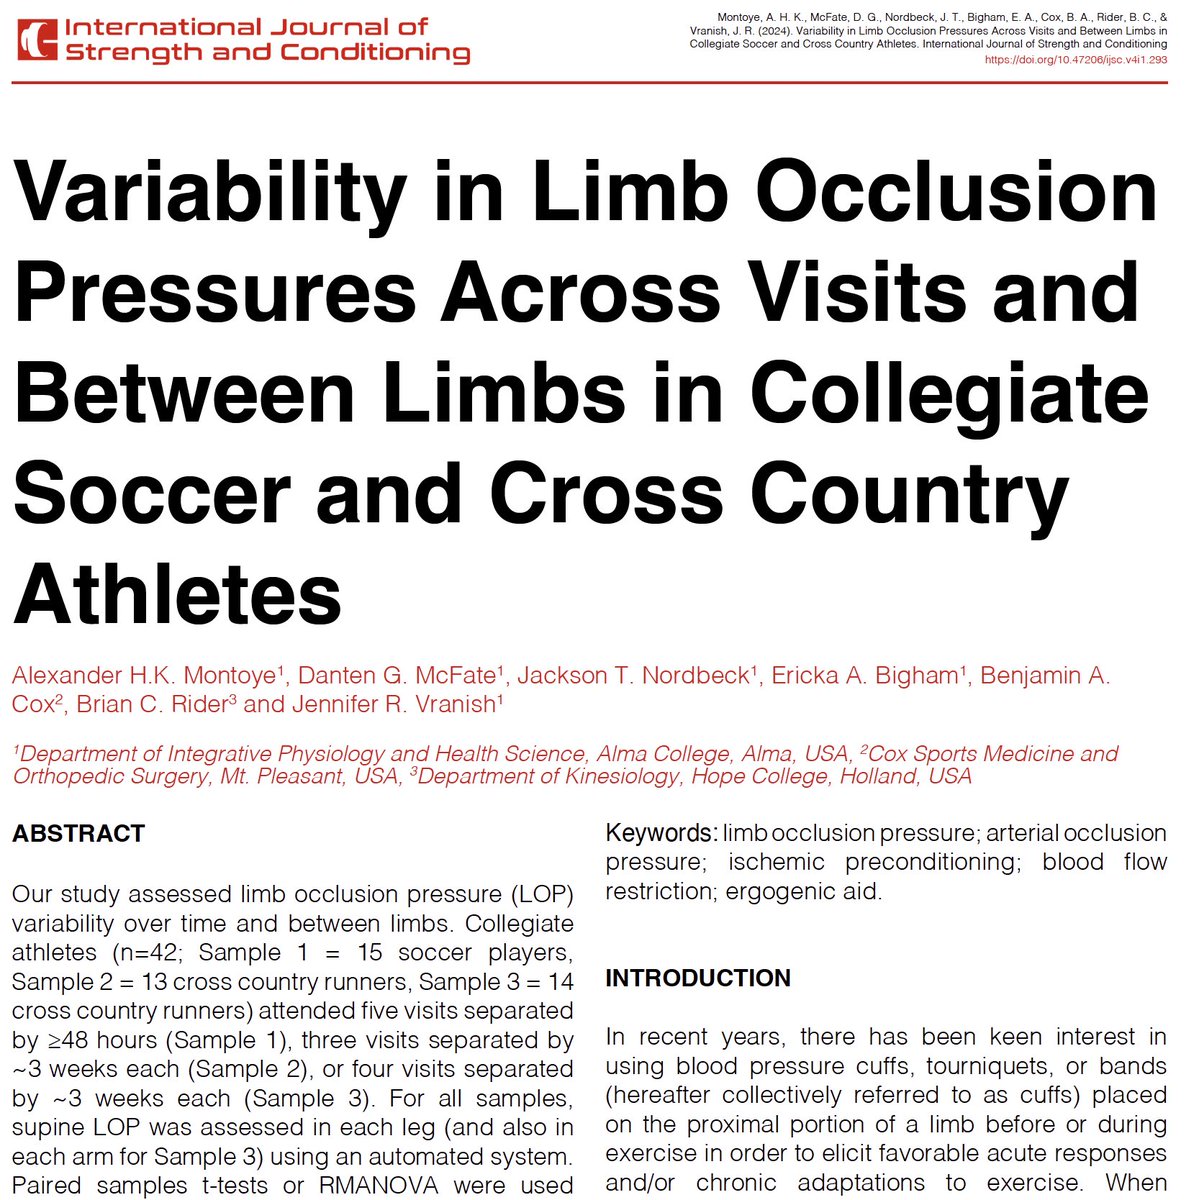 🚨Published Today🚨 Variability in Limb Occlusion Pressures Across Visits and Between Limbs in Collegiate Soccer and Cross Country Athletes By Alexander Montoye, Danten G. McFate, Jackson T. Nordbeck, Ericka A. Bigham, Benjamin A. Cox, Brian C. Rider and Jennifer R. Vranish…